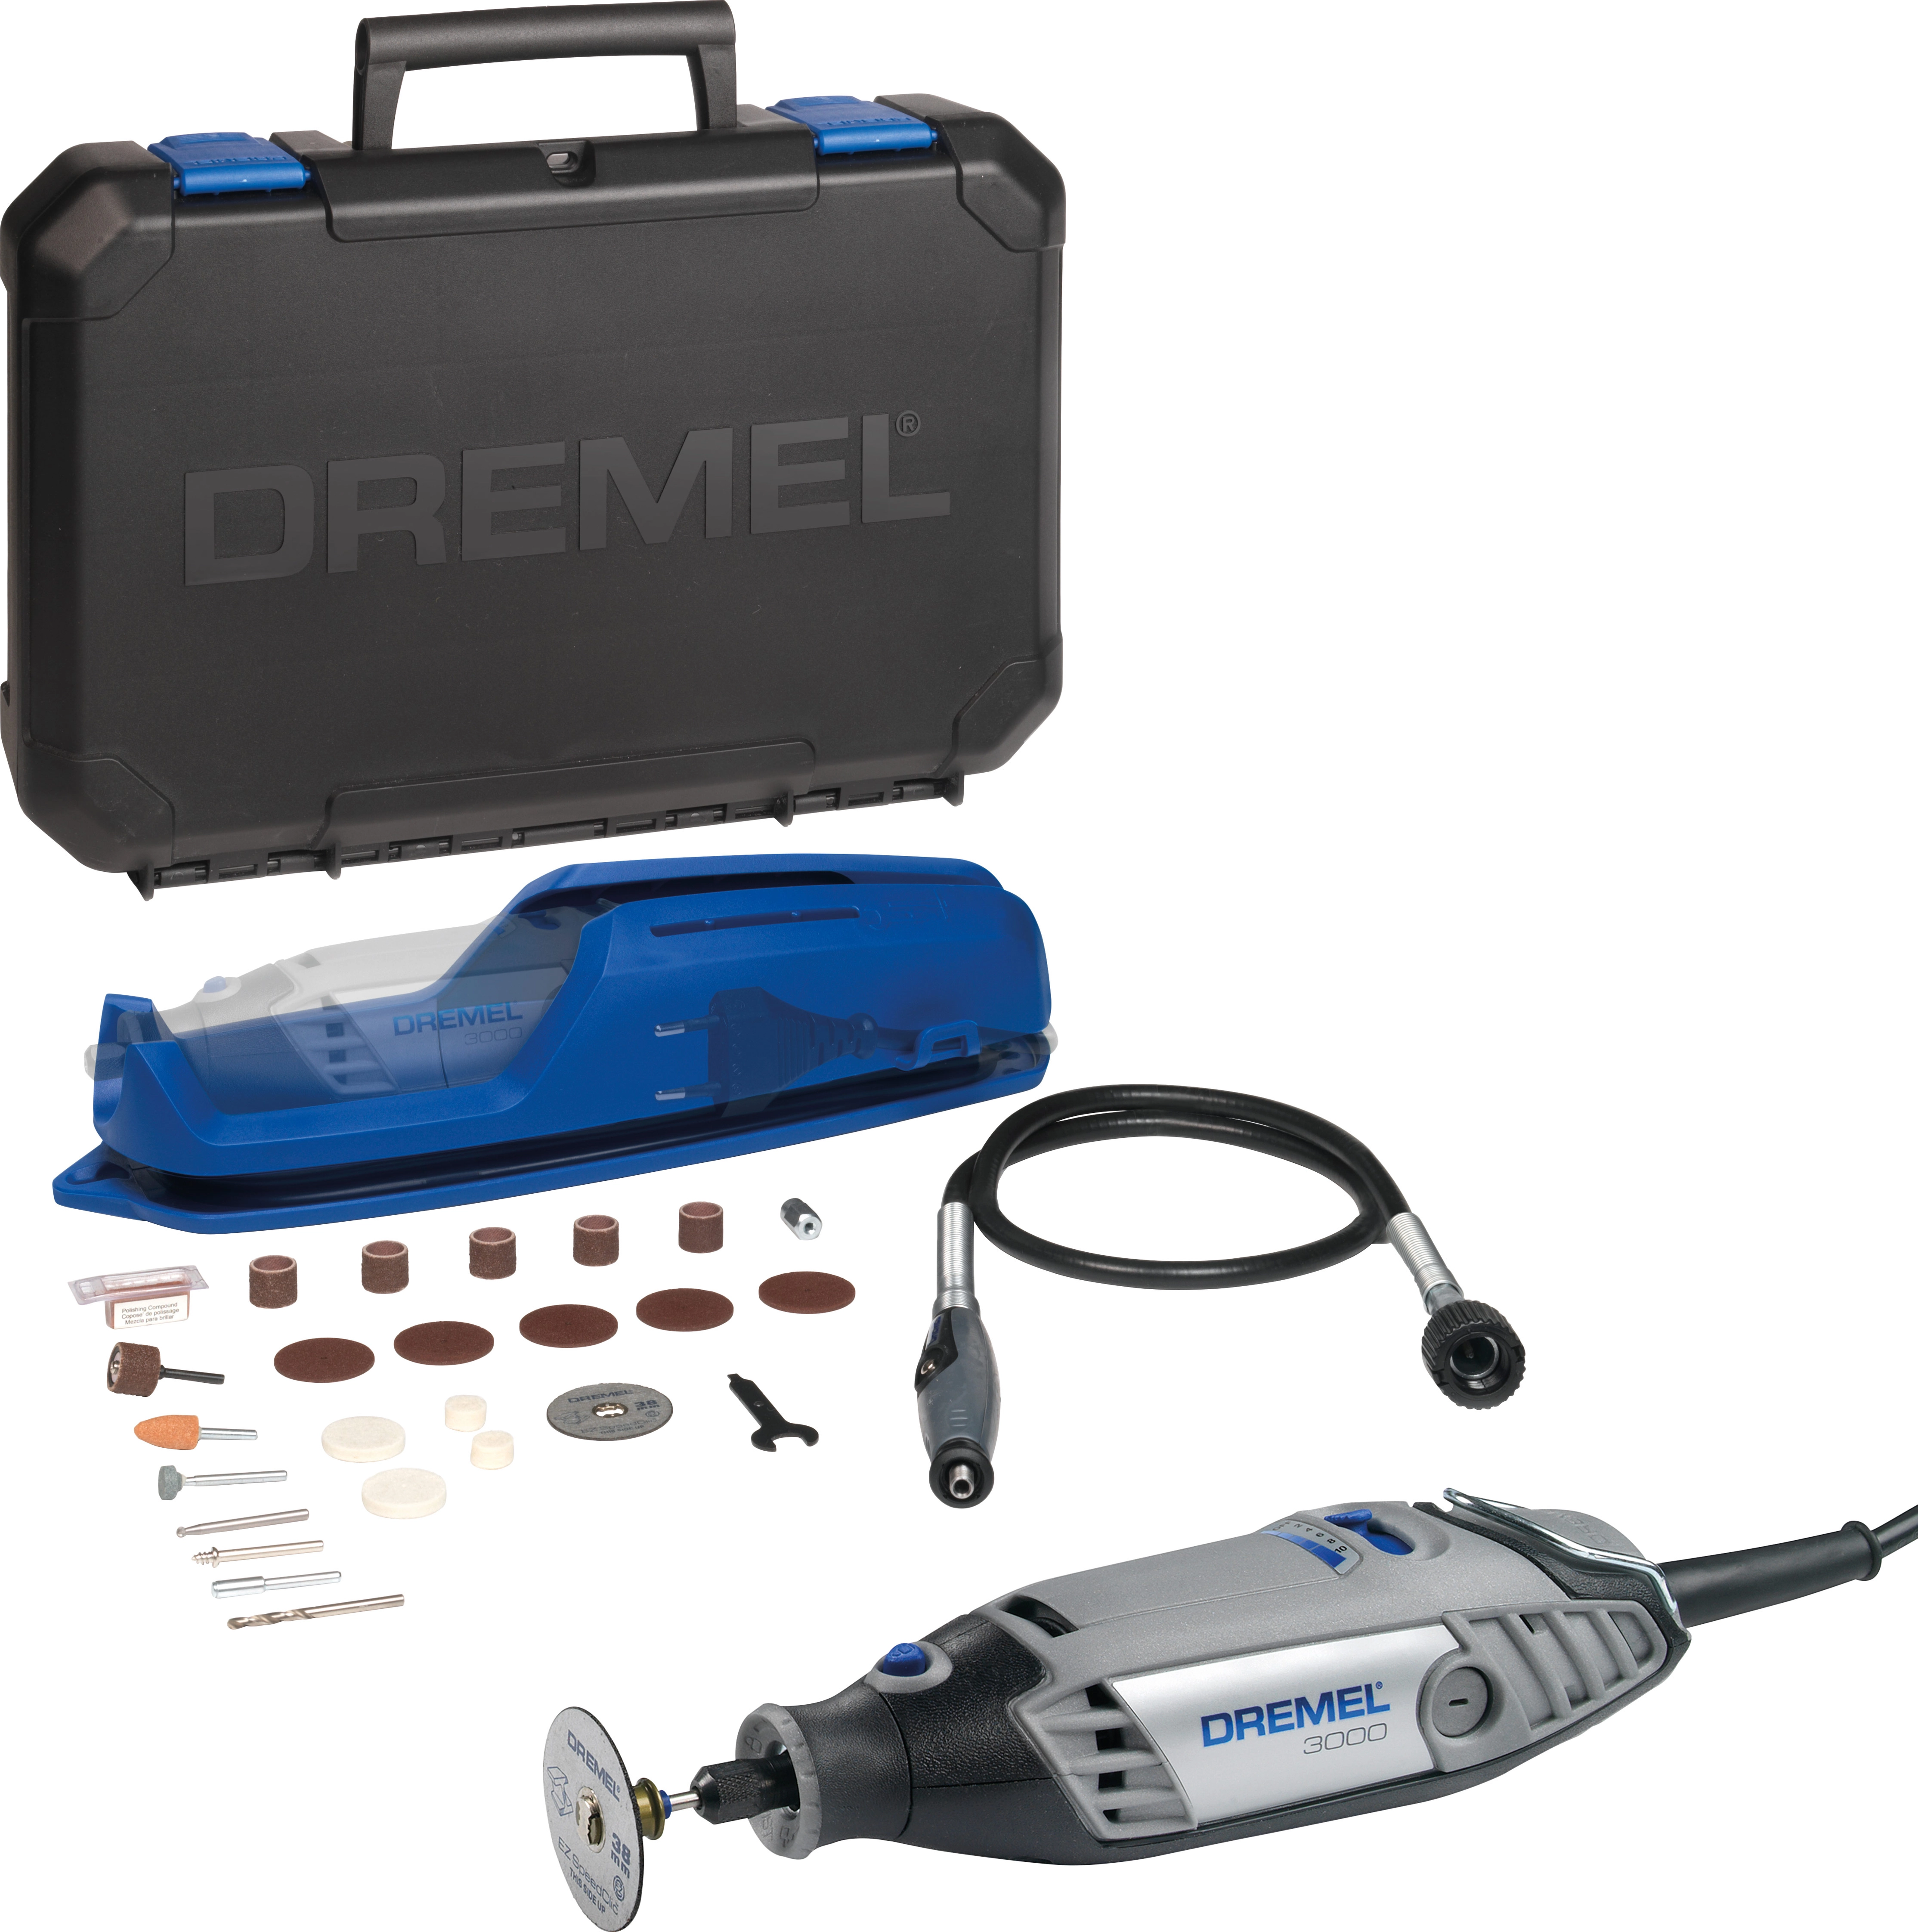 Dremel 3000-1/25 Variable Speed Rotary Tool Kit- 1 Attachment and 25  Accessories- Grinder, Mini Sander, Polisher, Router, and Engraver- Perfect  for Routing, Metal Cutting, Wood Carving, and Polishing 